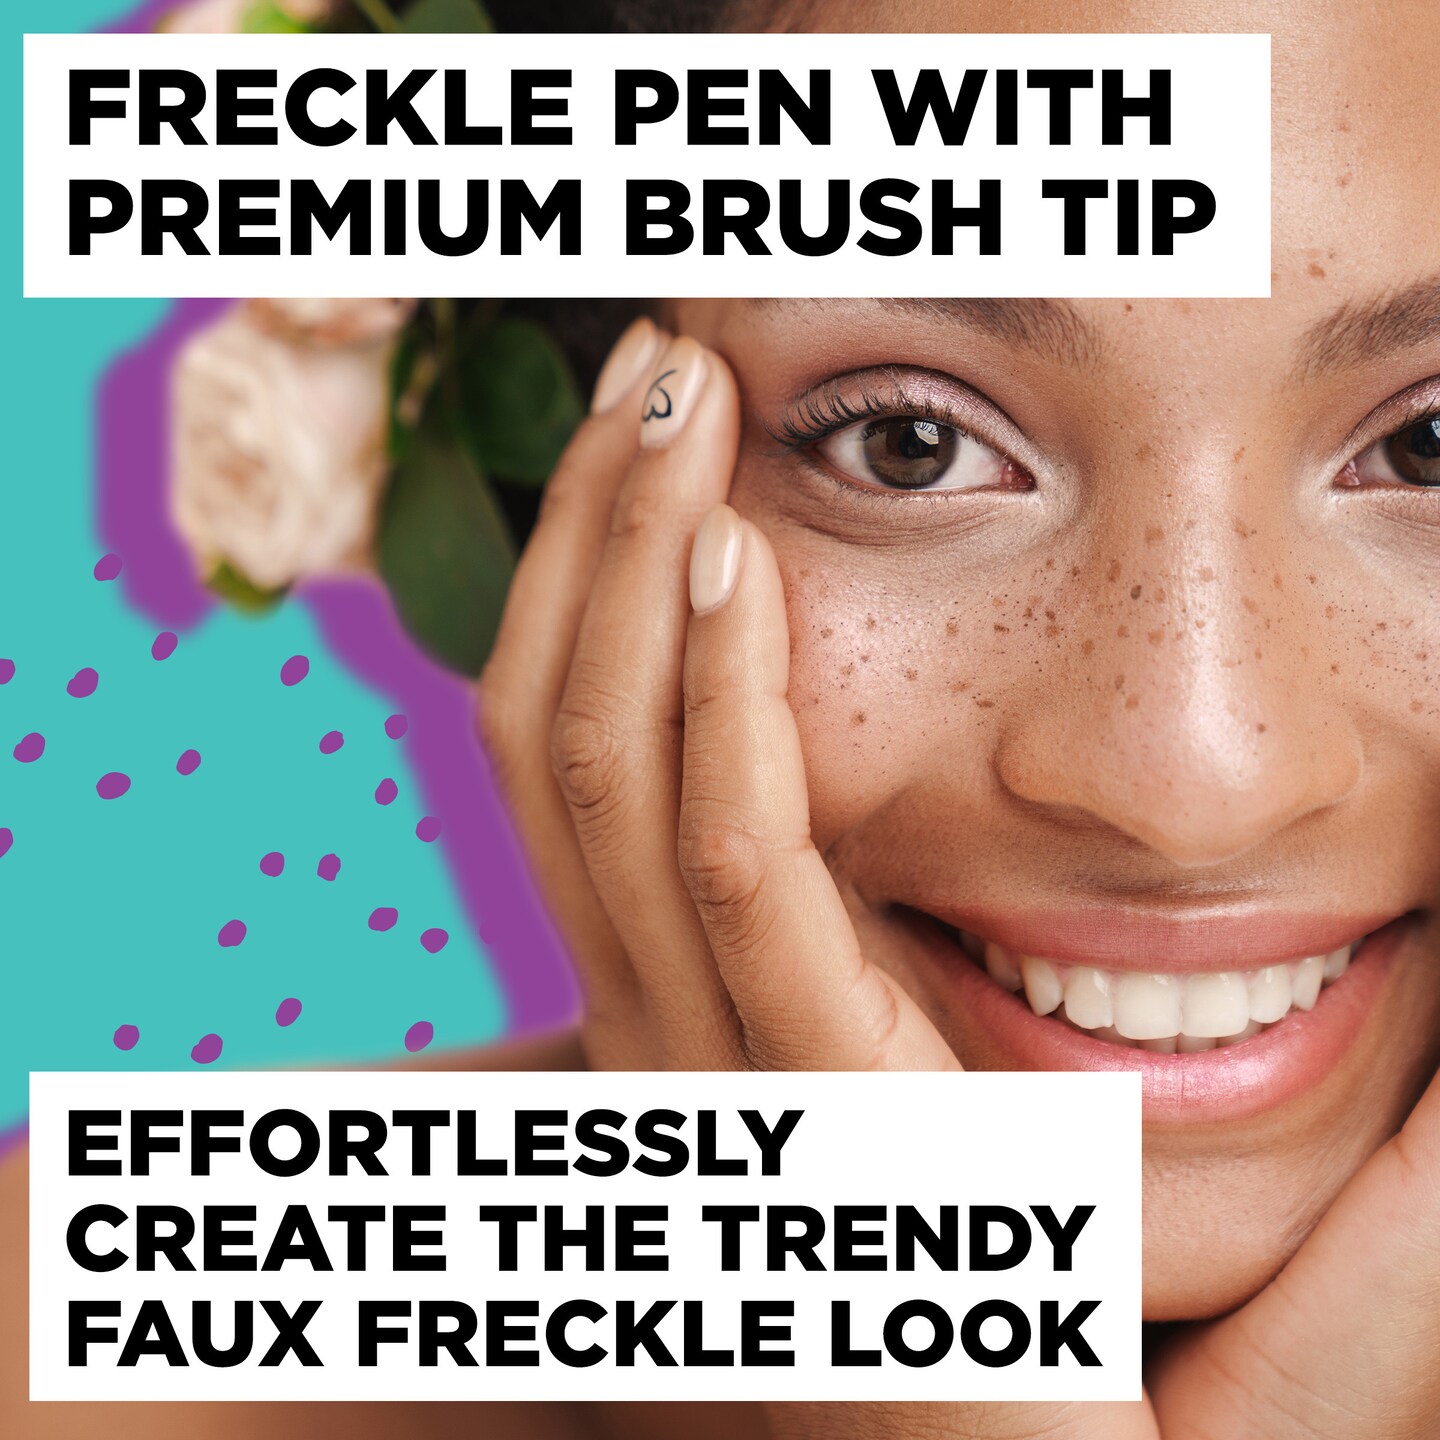 BodyMark Freckle Pen, Soft Brush Tip, 1 Count Pen in Brown Freckle, Cosmetic Quality Freckle Pens for Skin